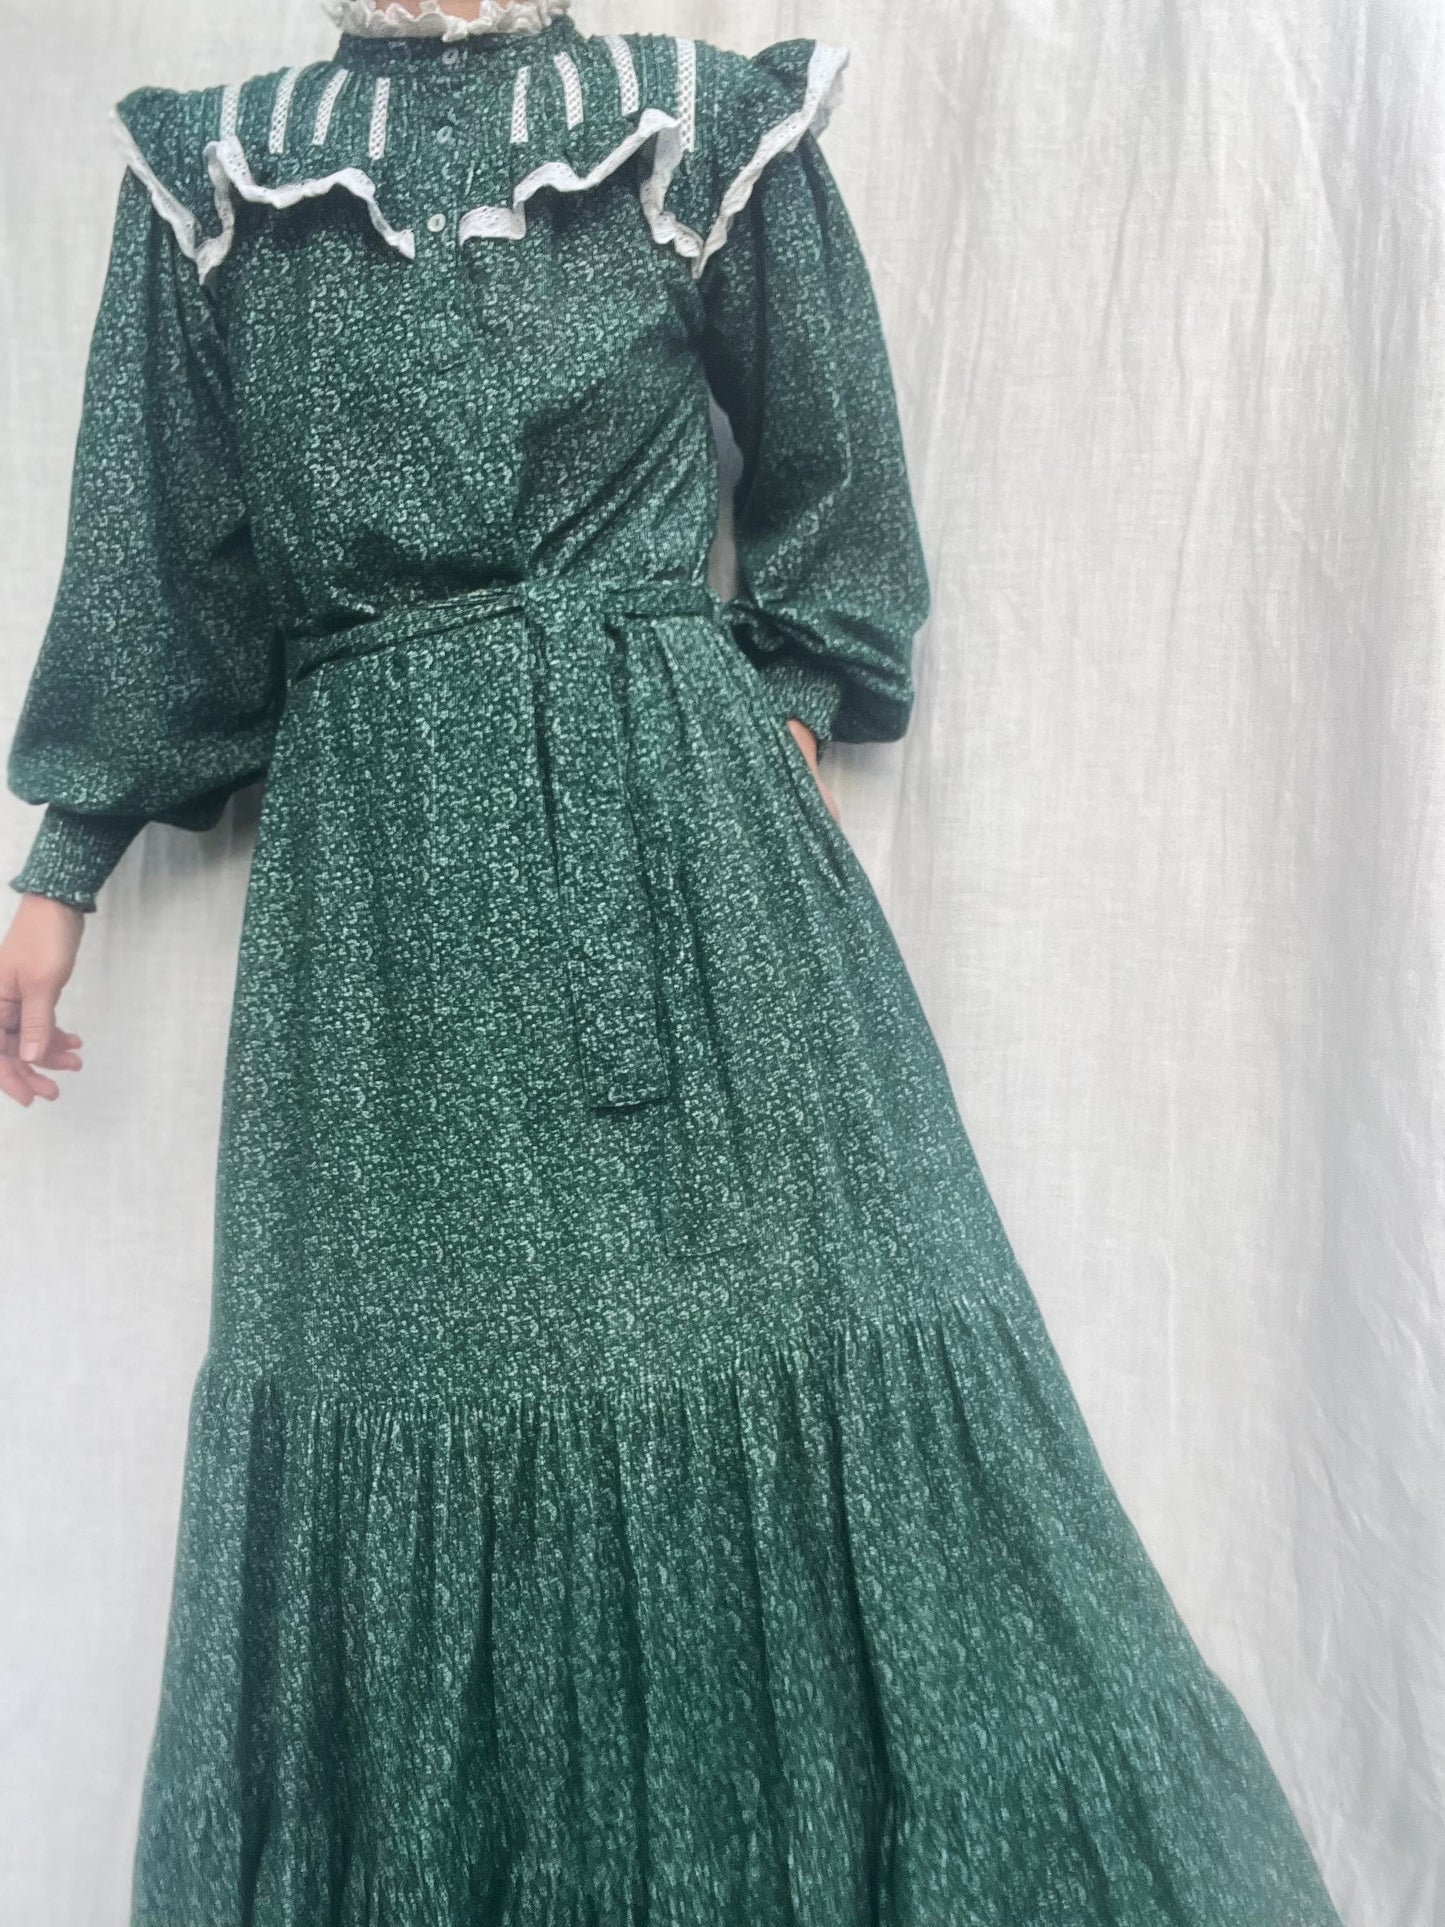 100% RECYCLED COTTON CORDUROY - CLOTHILDE DRESS FOREST GREEN FLORAL